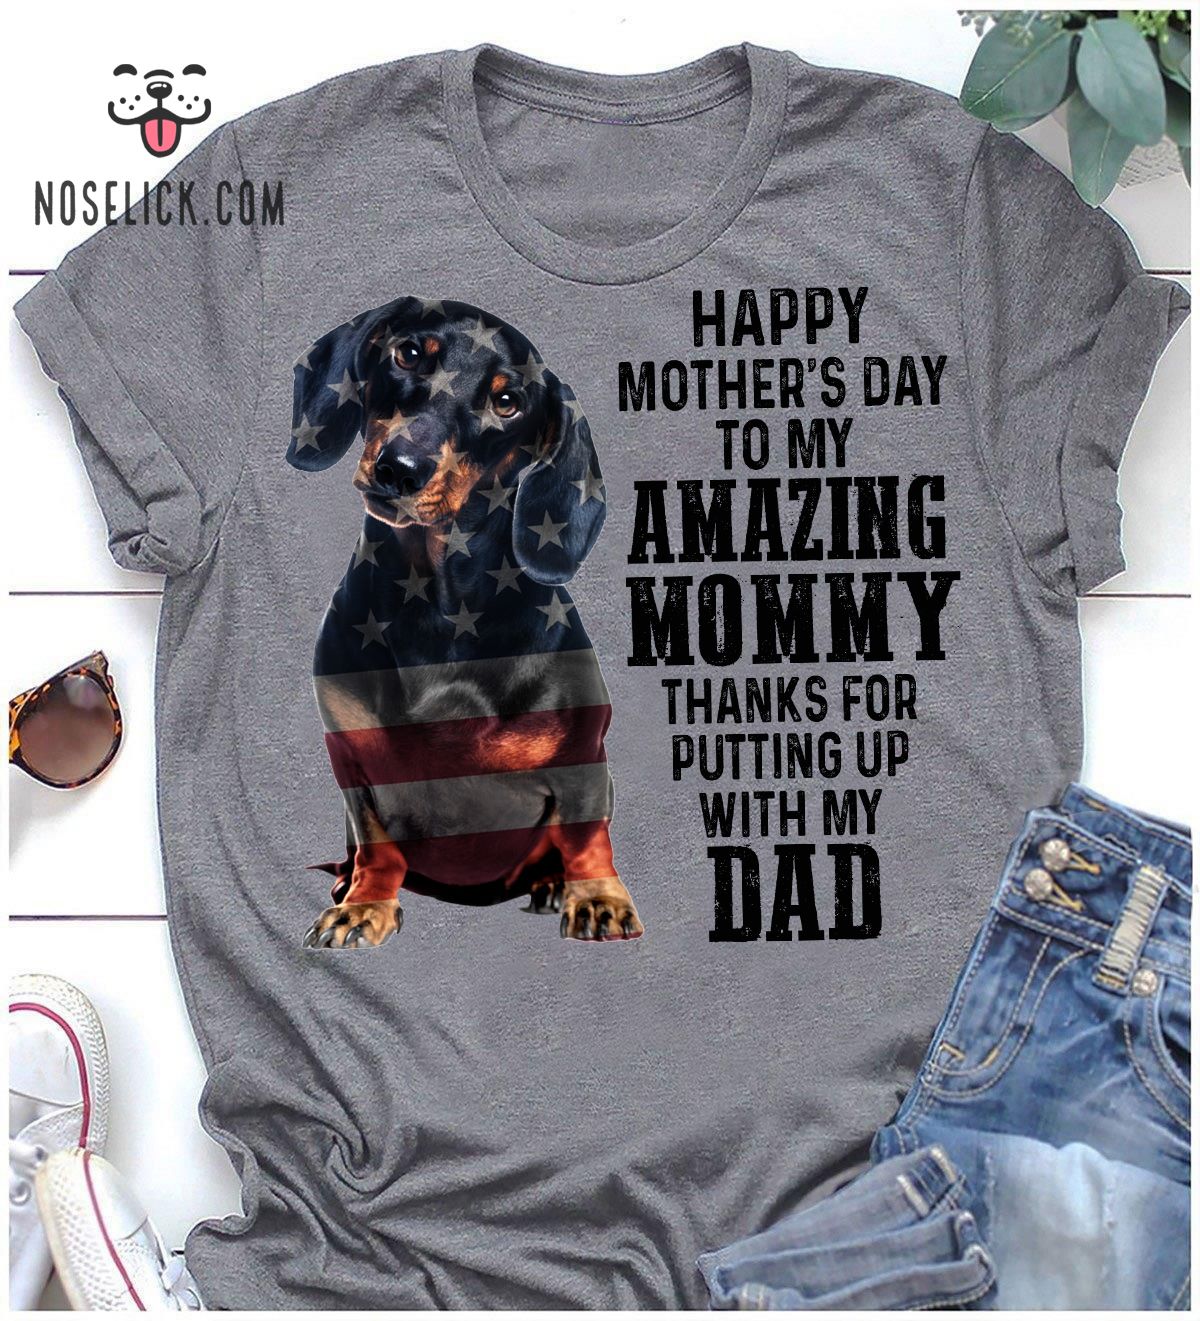 Dachshund T-Shirt Dachshund Shirt Dachshund Owner Gift Dachshund Mom Shirt Dachshund Mama Shirt Mother Day Gift Mother Days Shirt